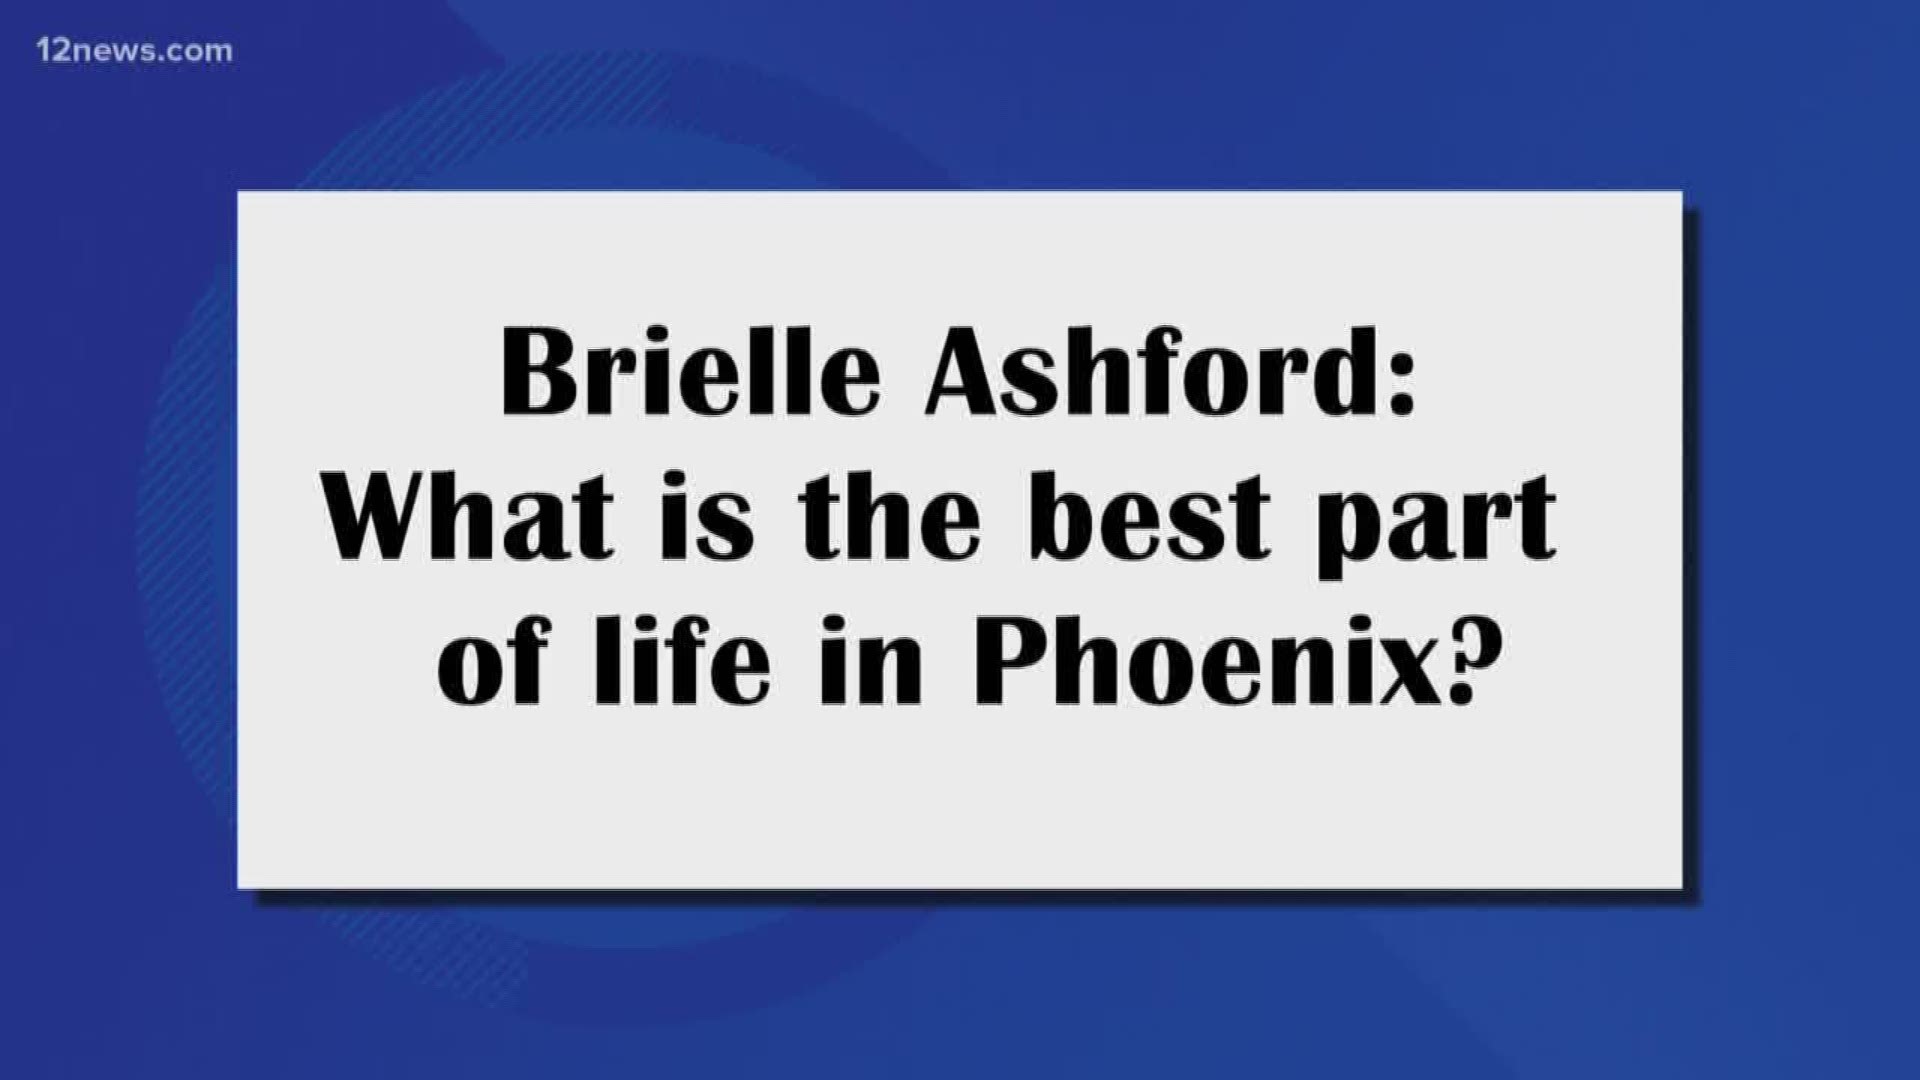 Caribe has lived a lot of places but there's something special about living in Phoenix. What is it?